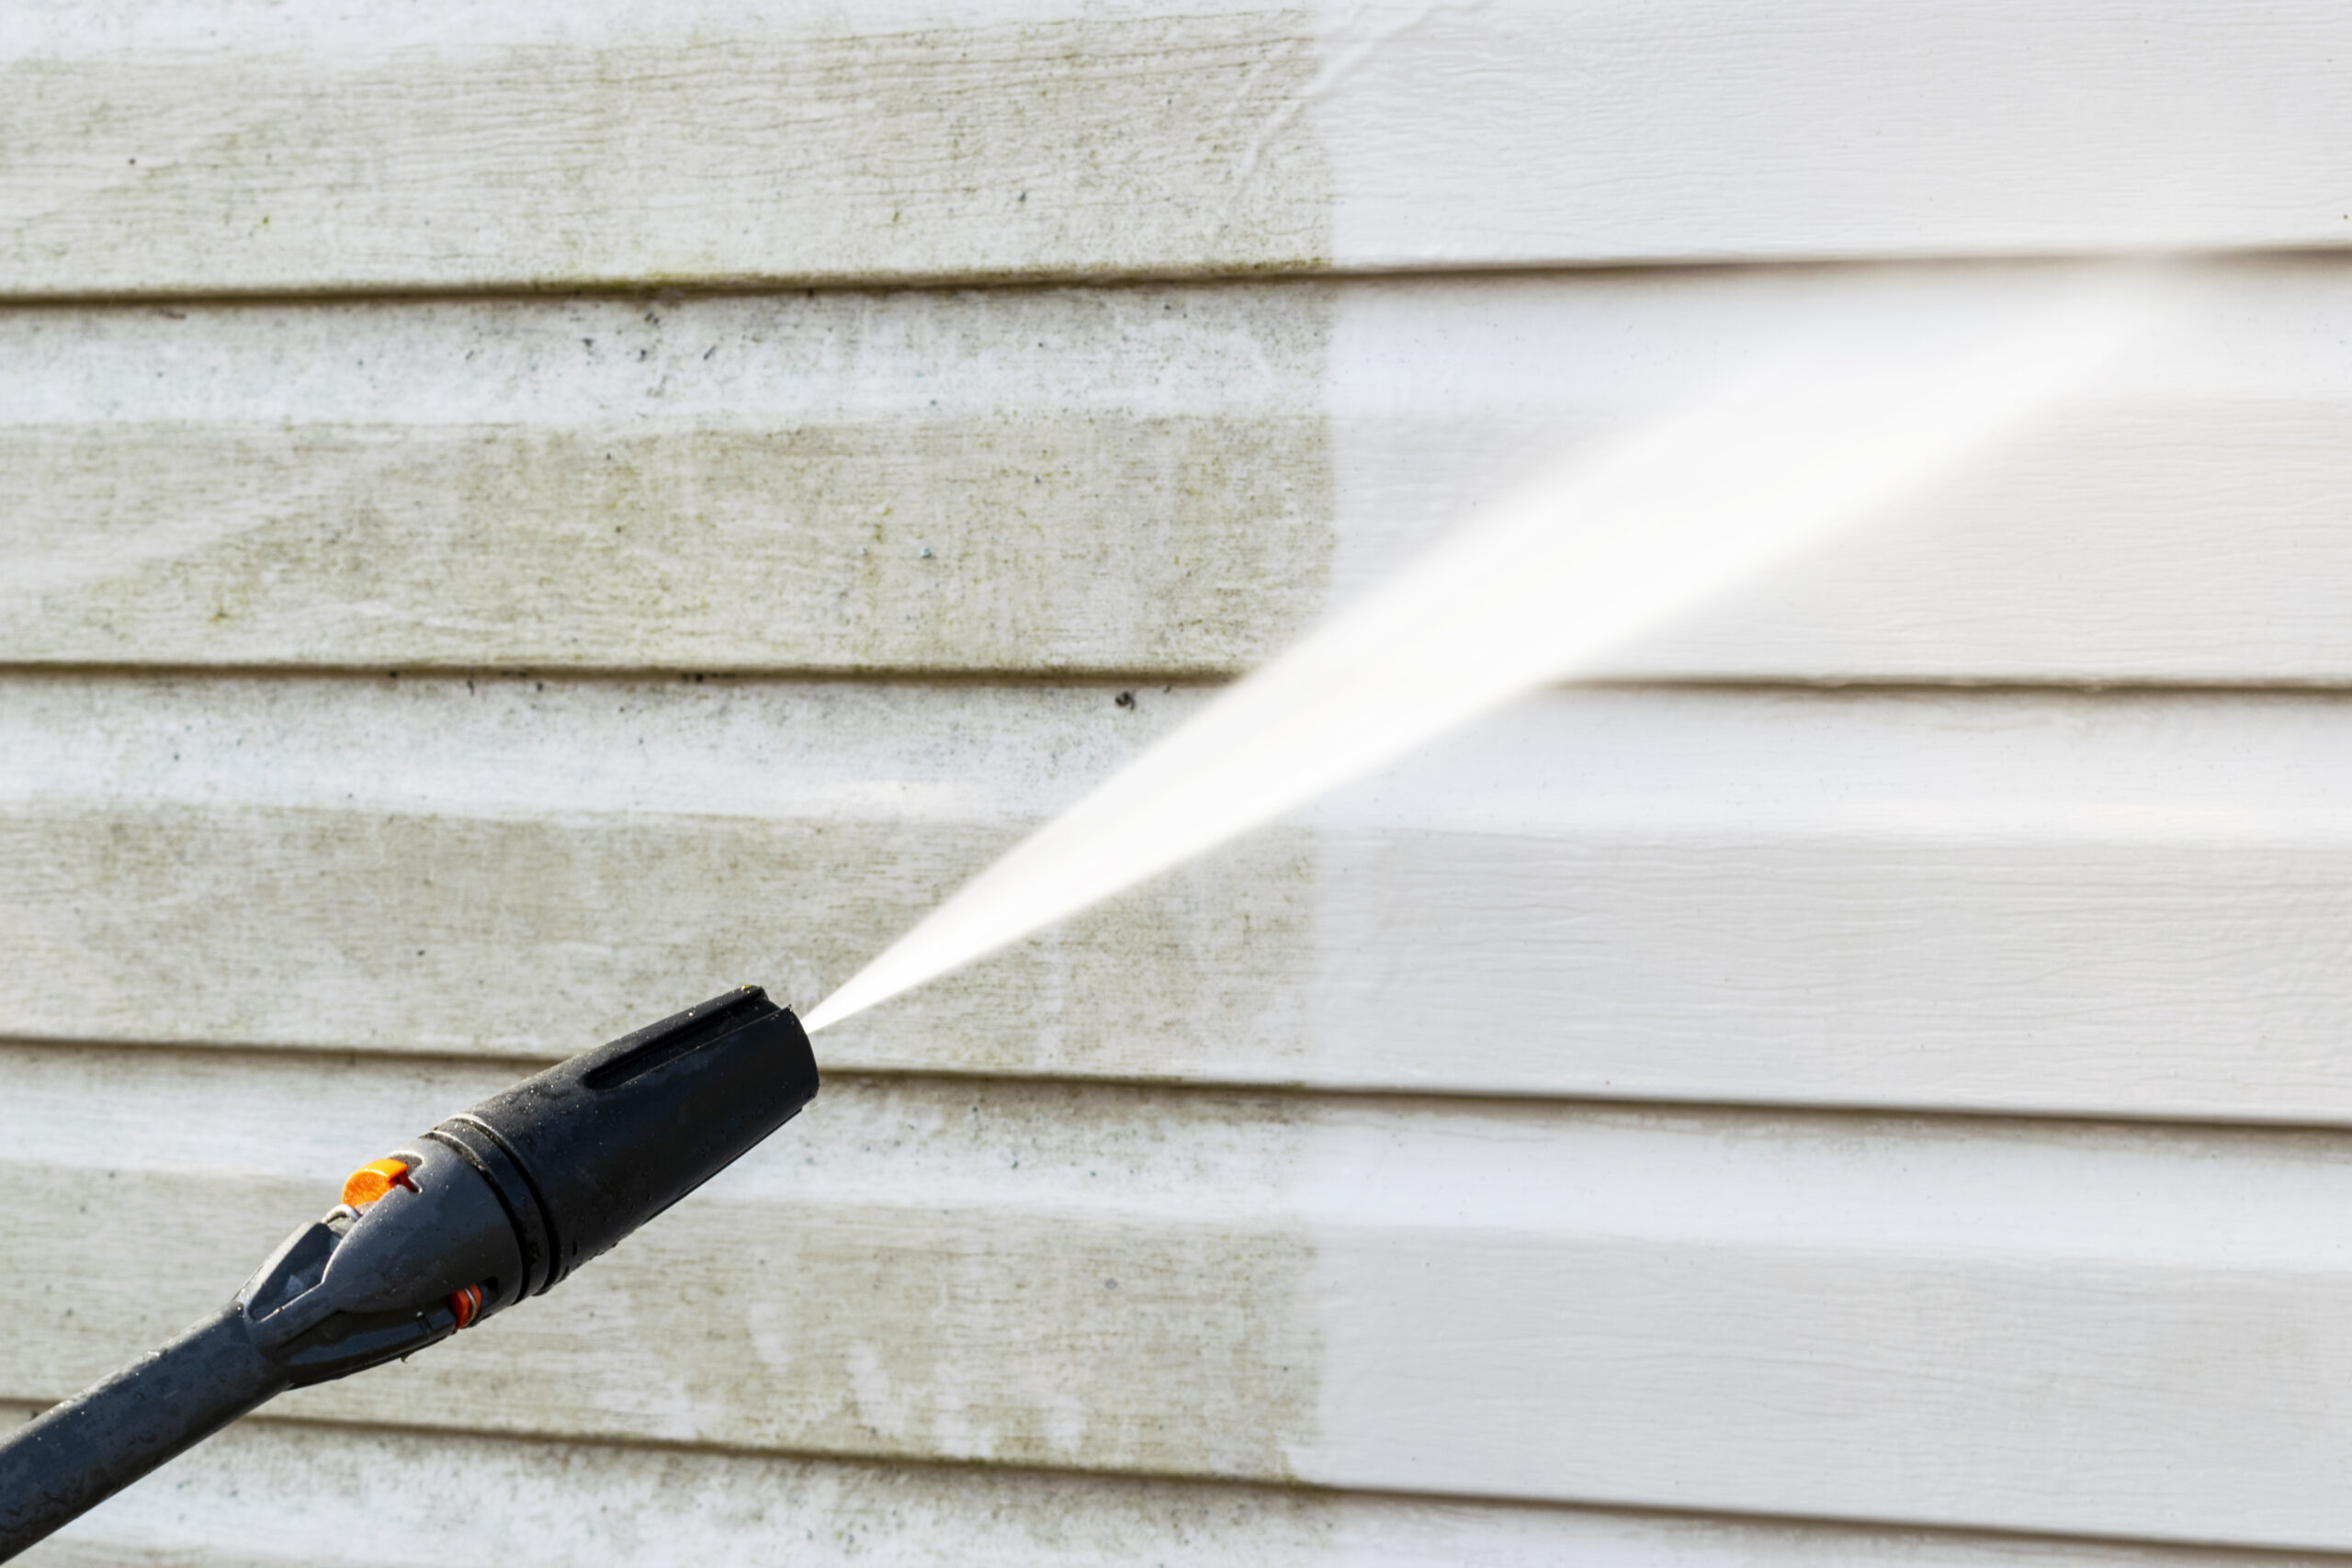 Pressure washing your home